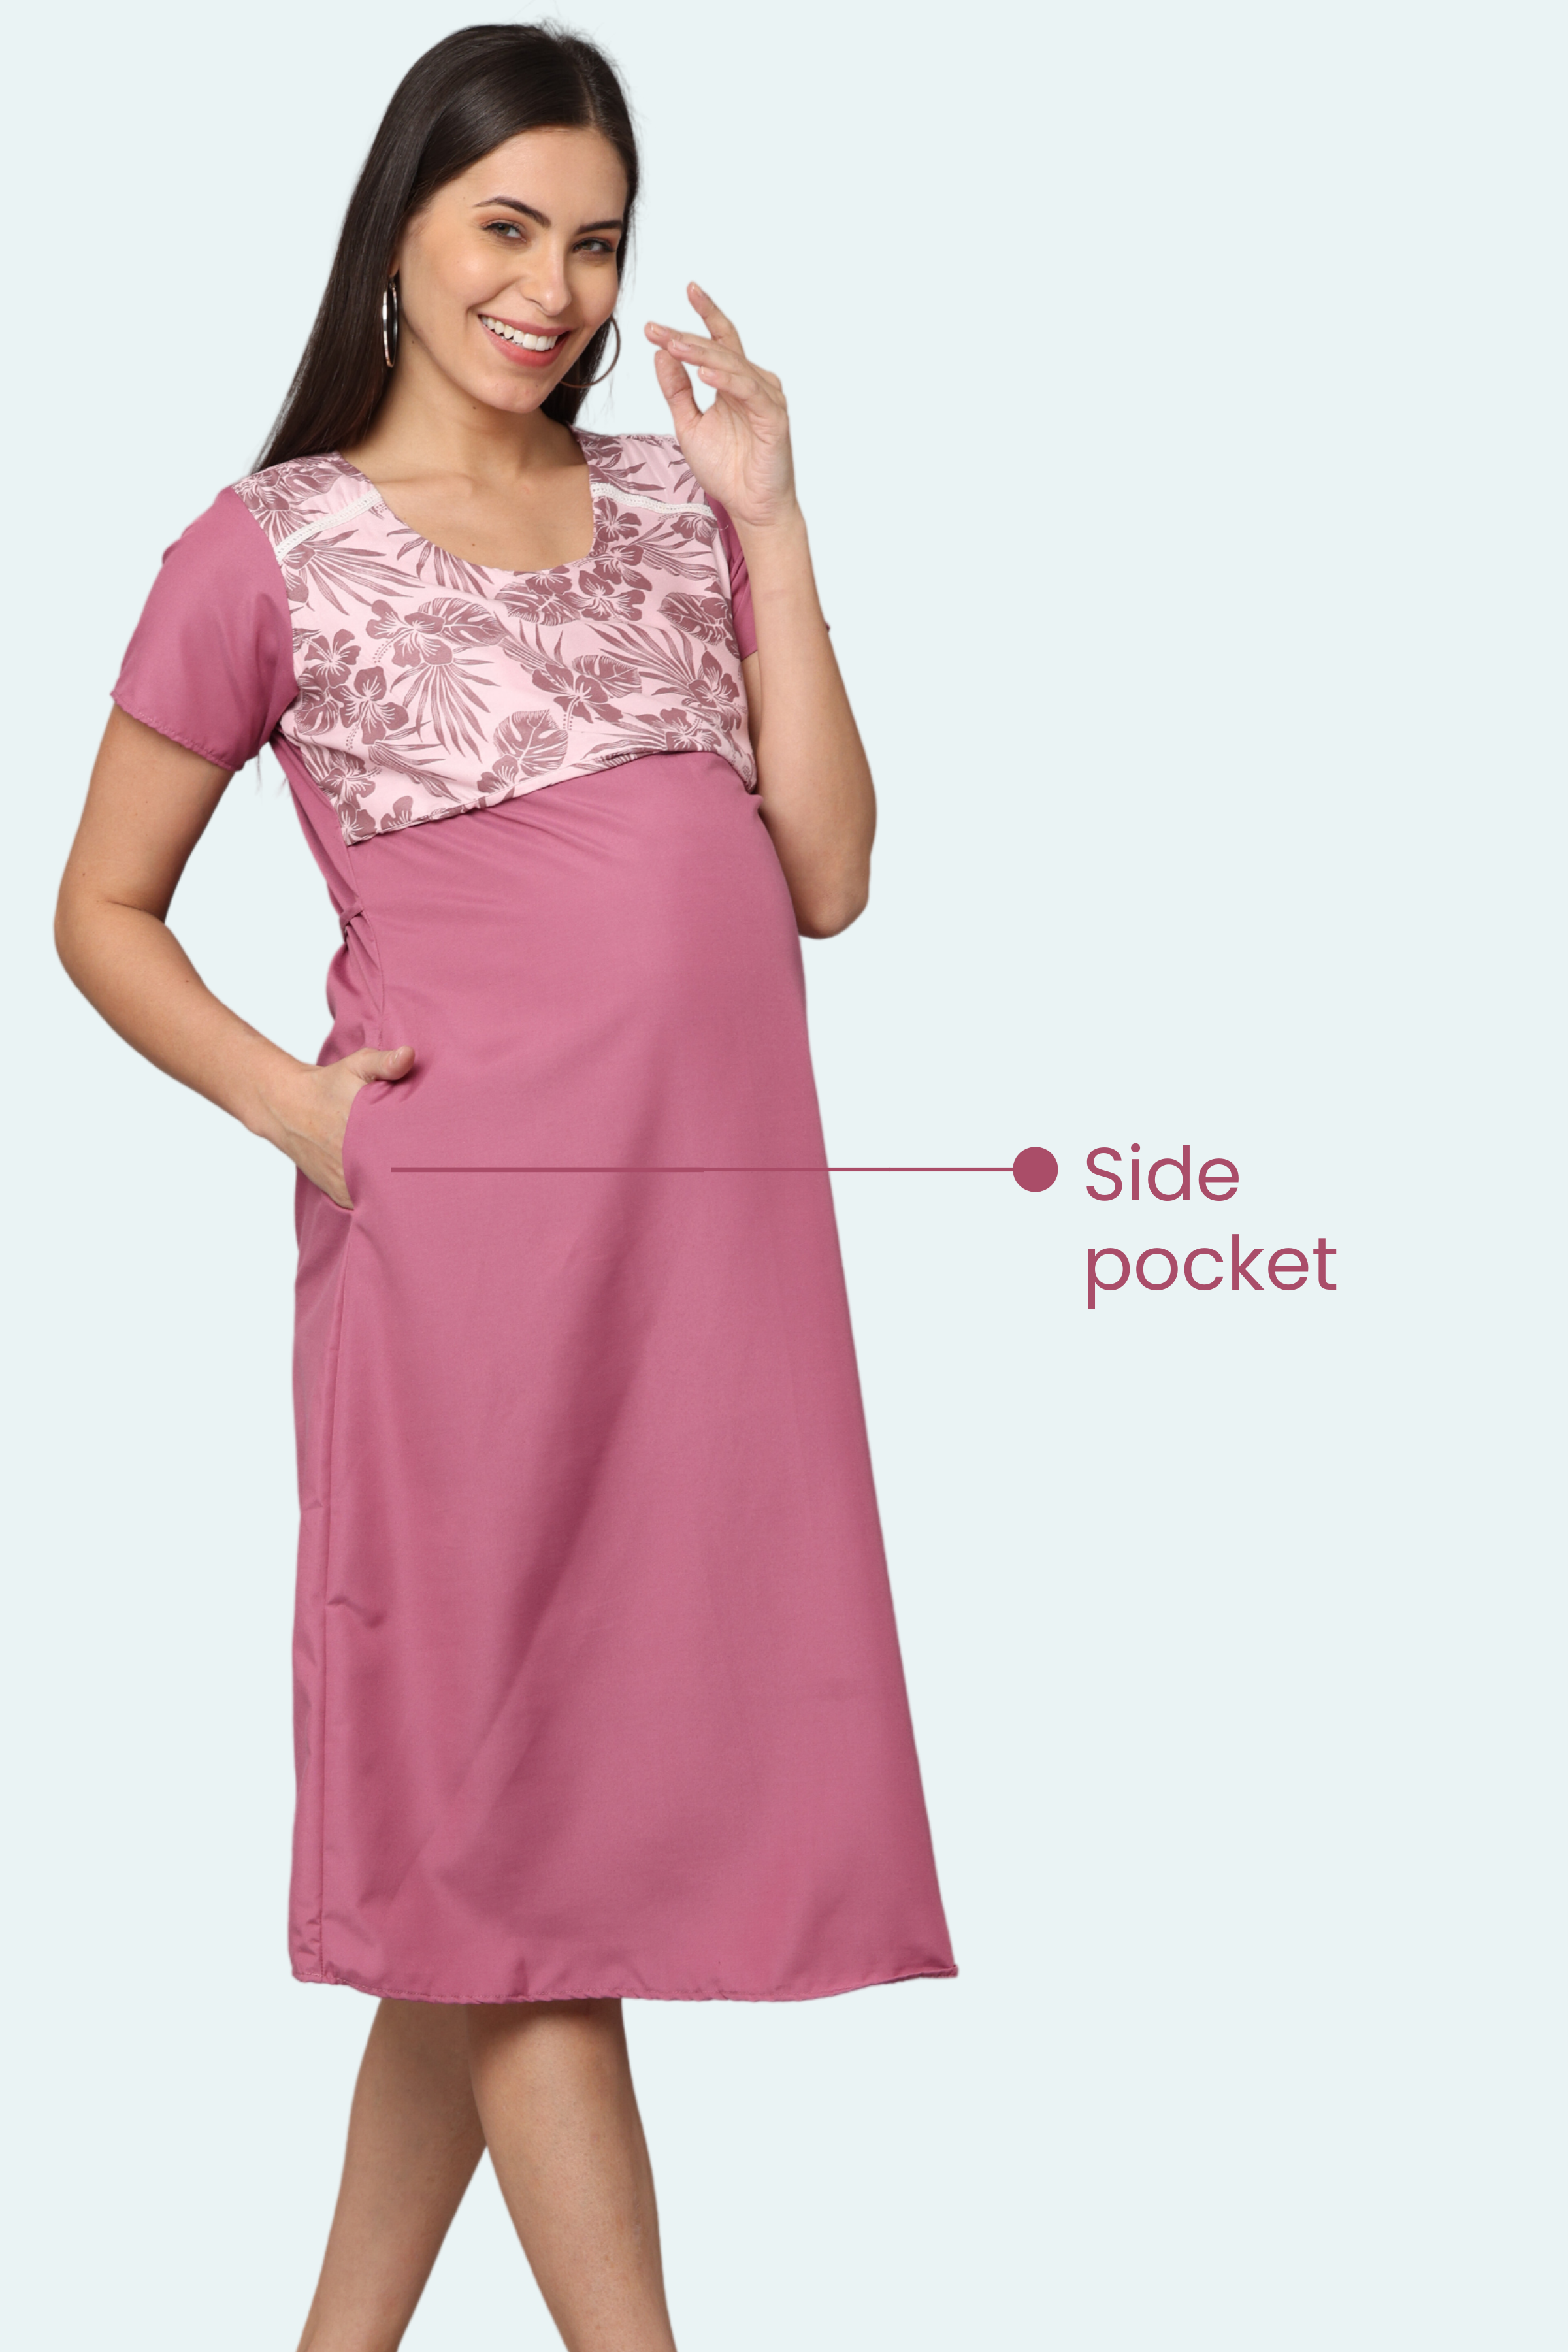 Maternity Wear: Buy Pregnancy Care & Maternity Clothes Online India -  FirstCry.com